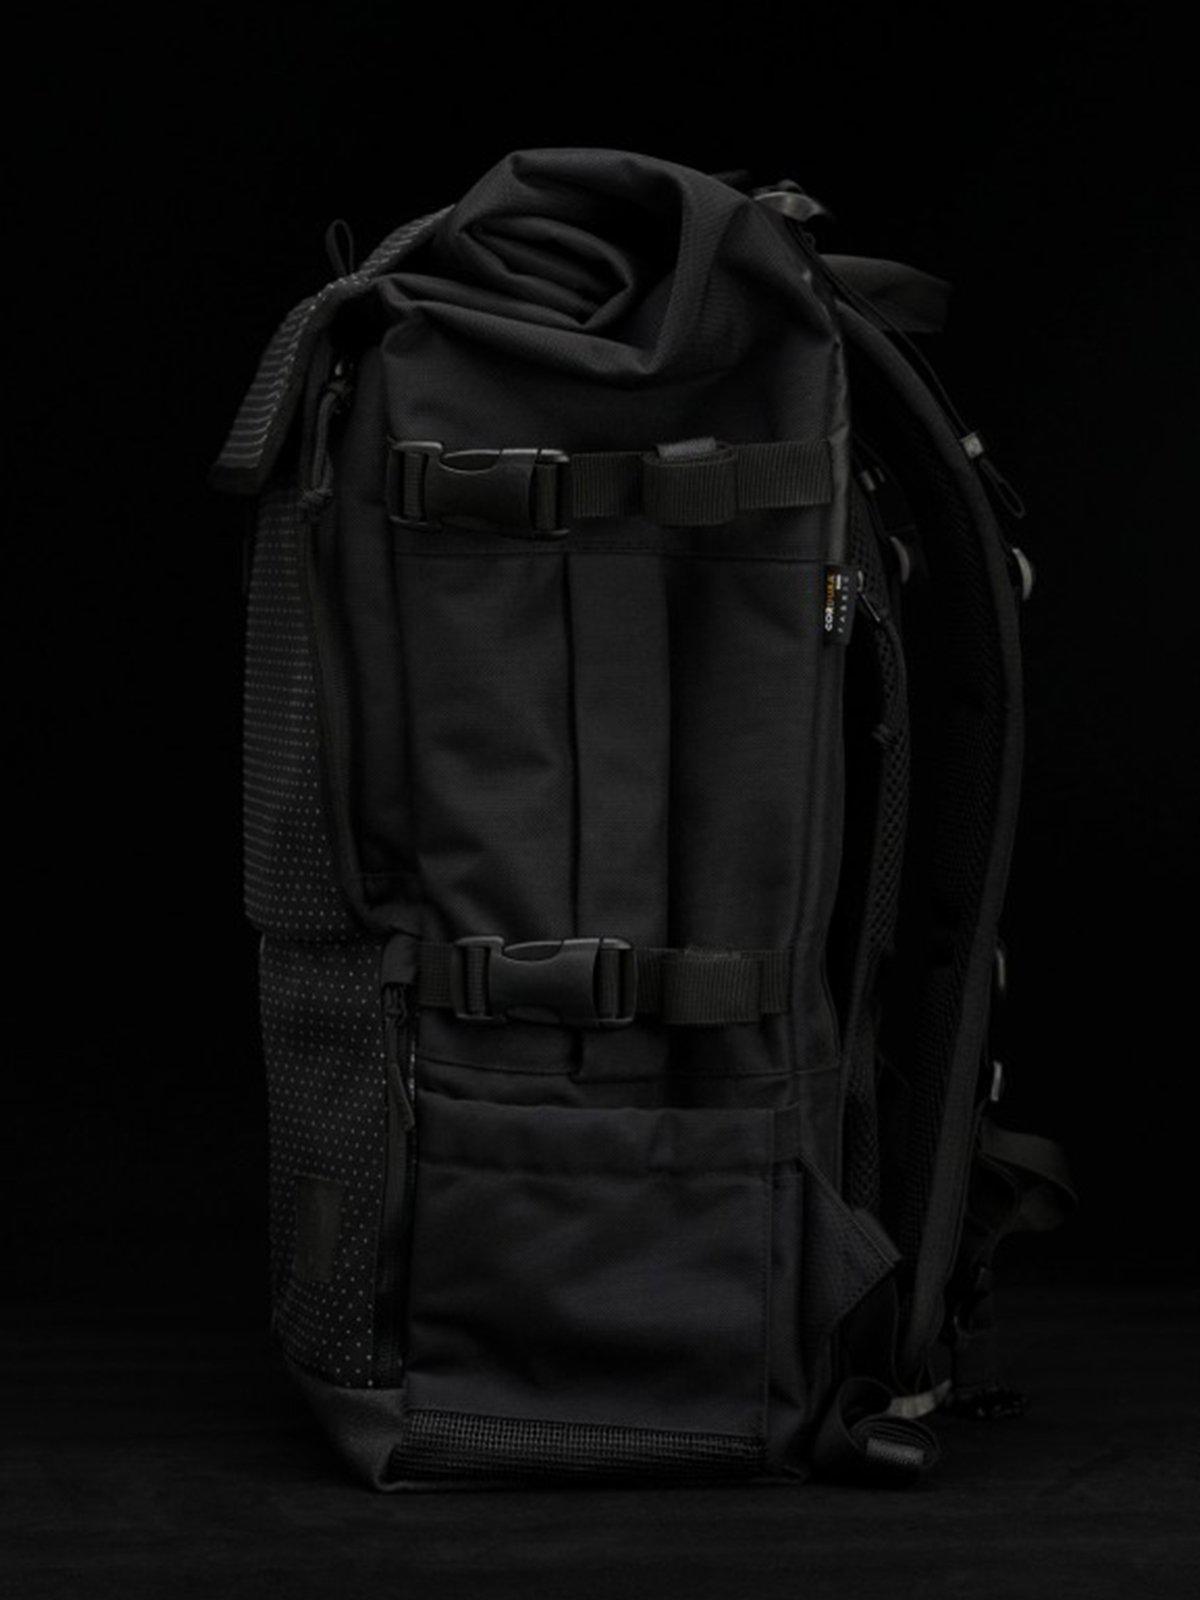 Life Behind Bars The Peloton Eclipse 30-42L Rolltop Backpack Black Reflective - MORE by Morello Indonesia